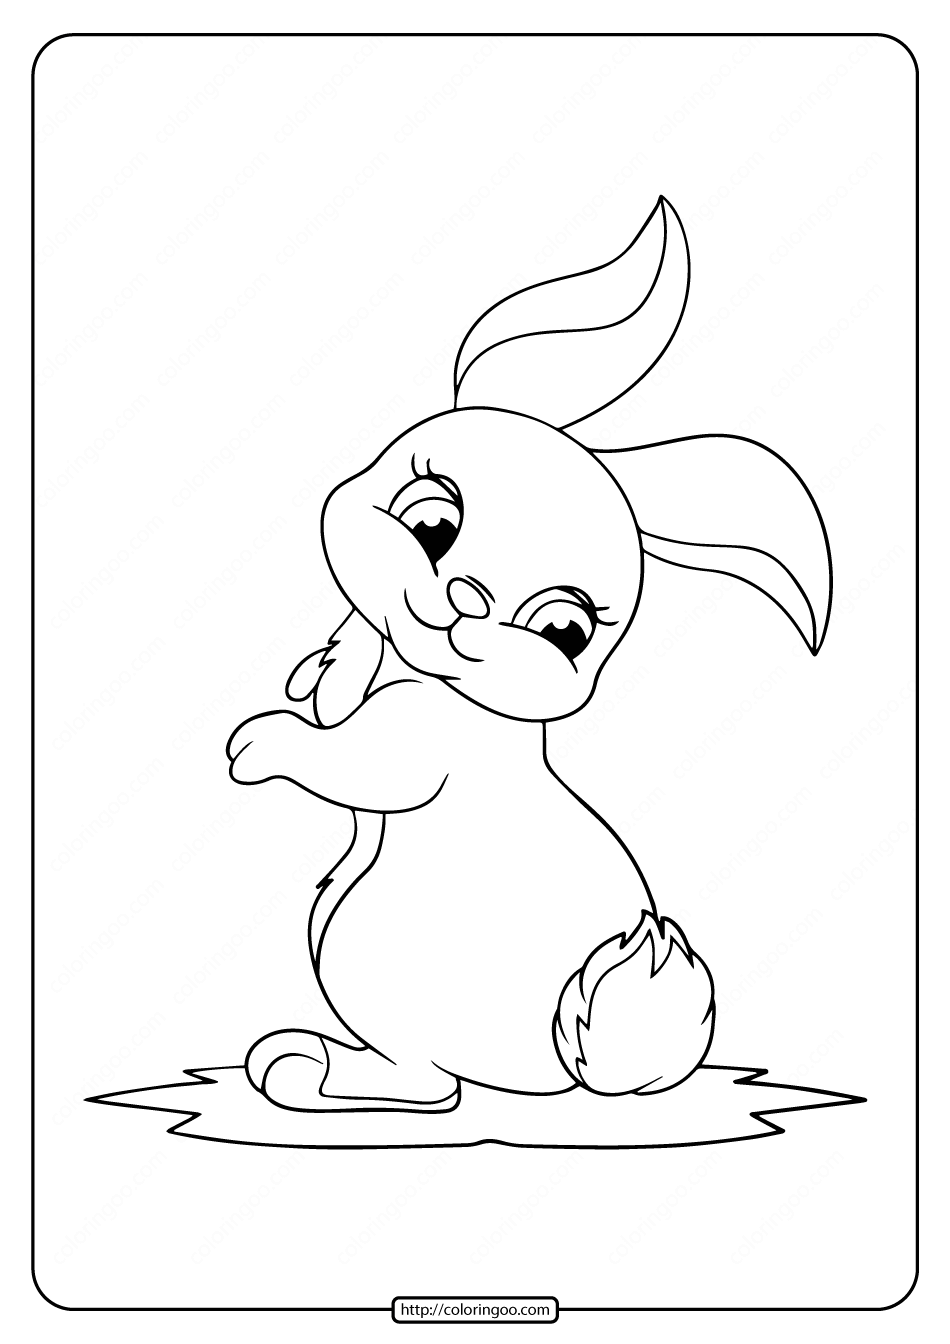 printable rabbit with funny tail coloring page